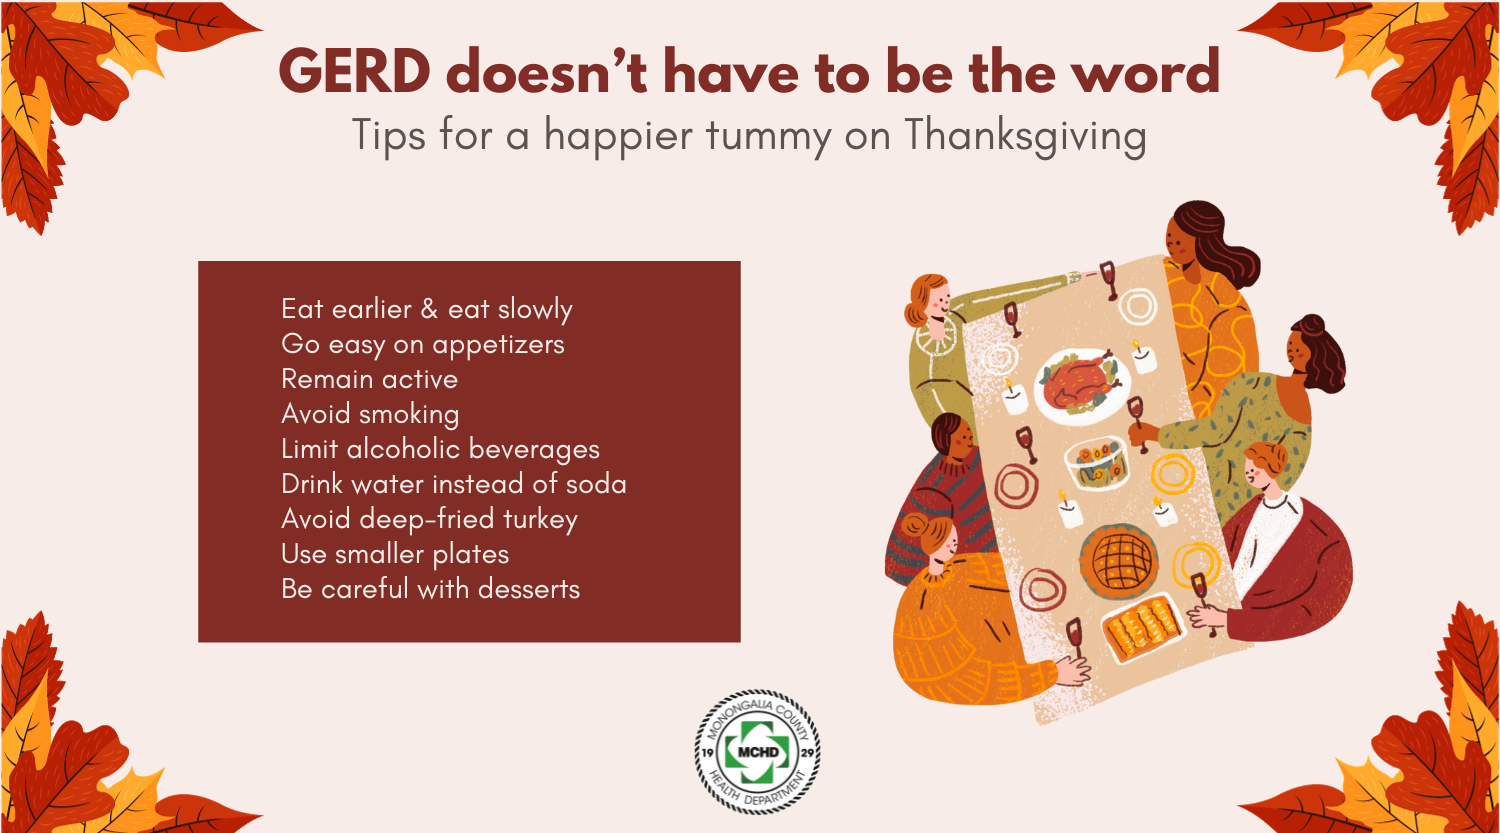 GERD doesn't have to be the word: Tips for a happier tummy on Thanksgiving